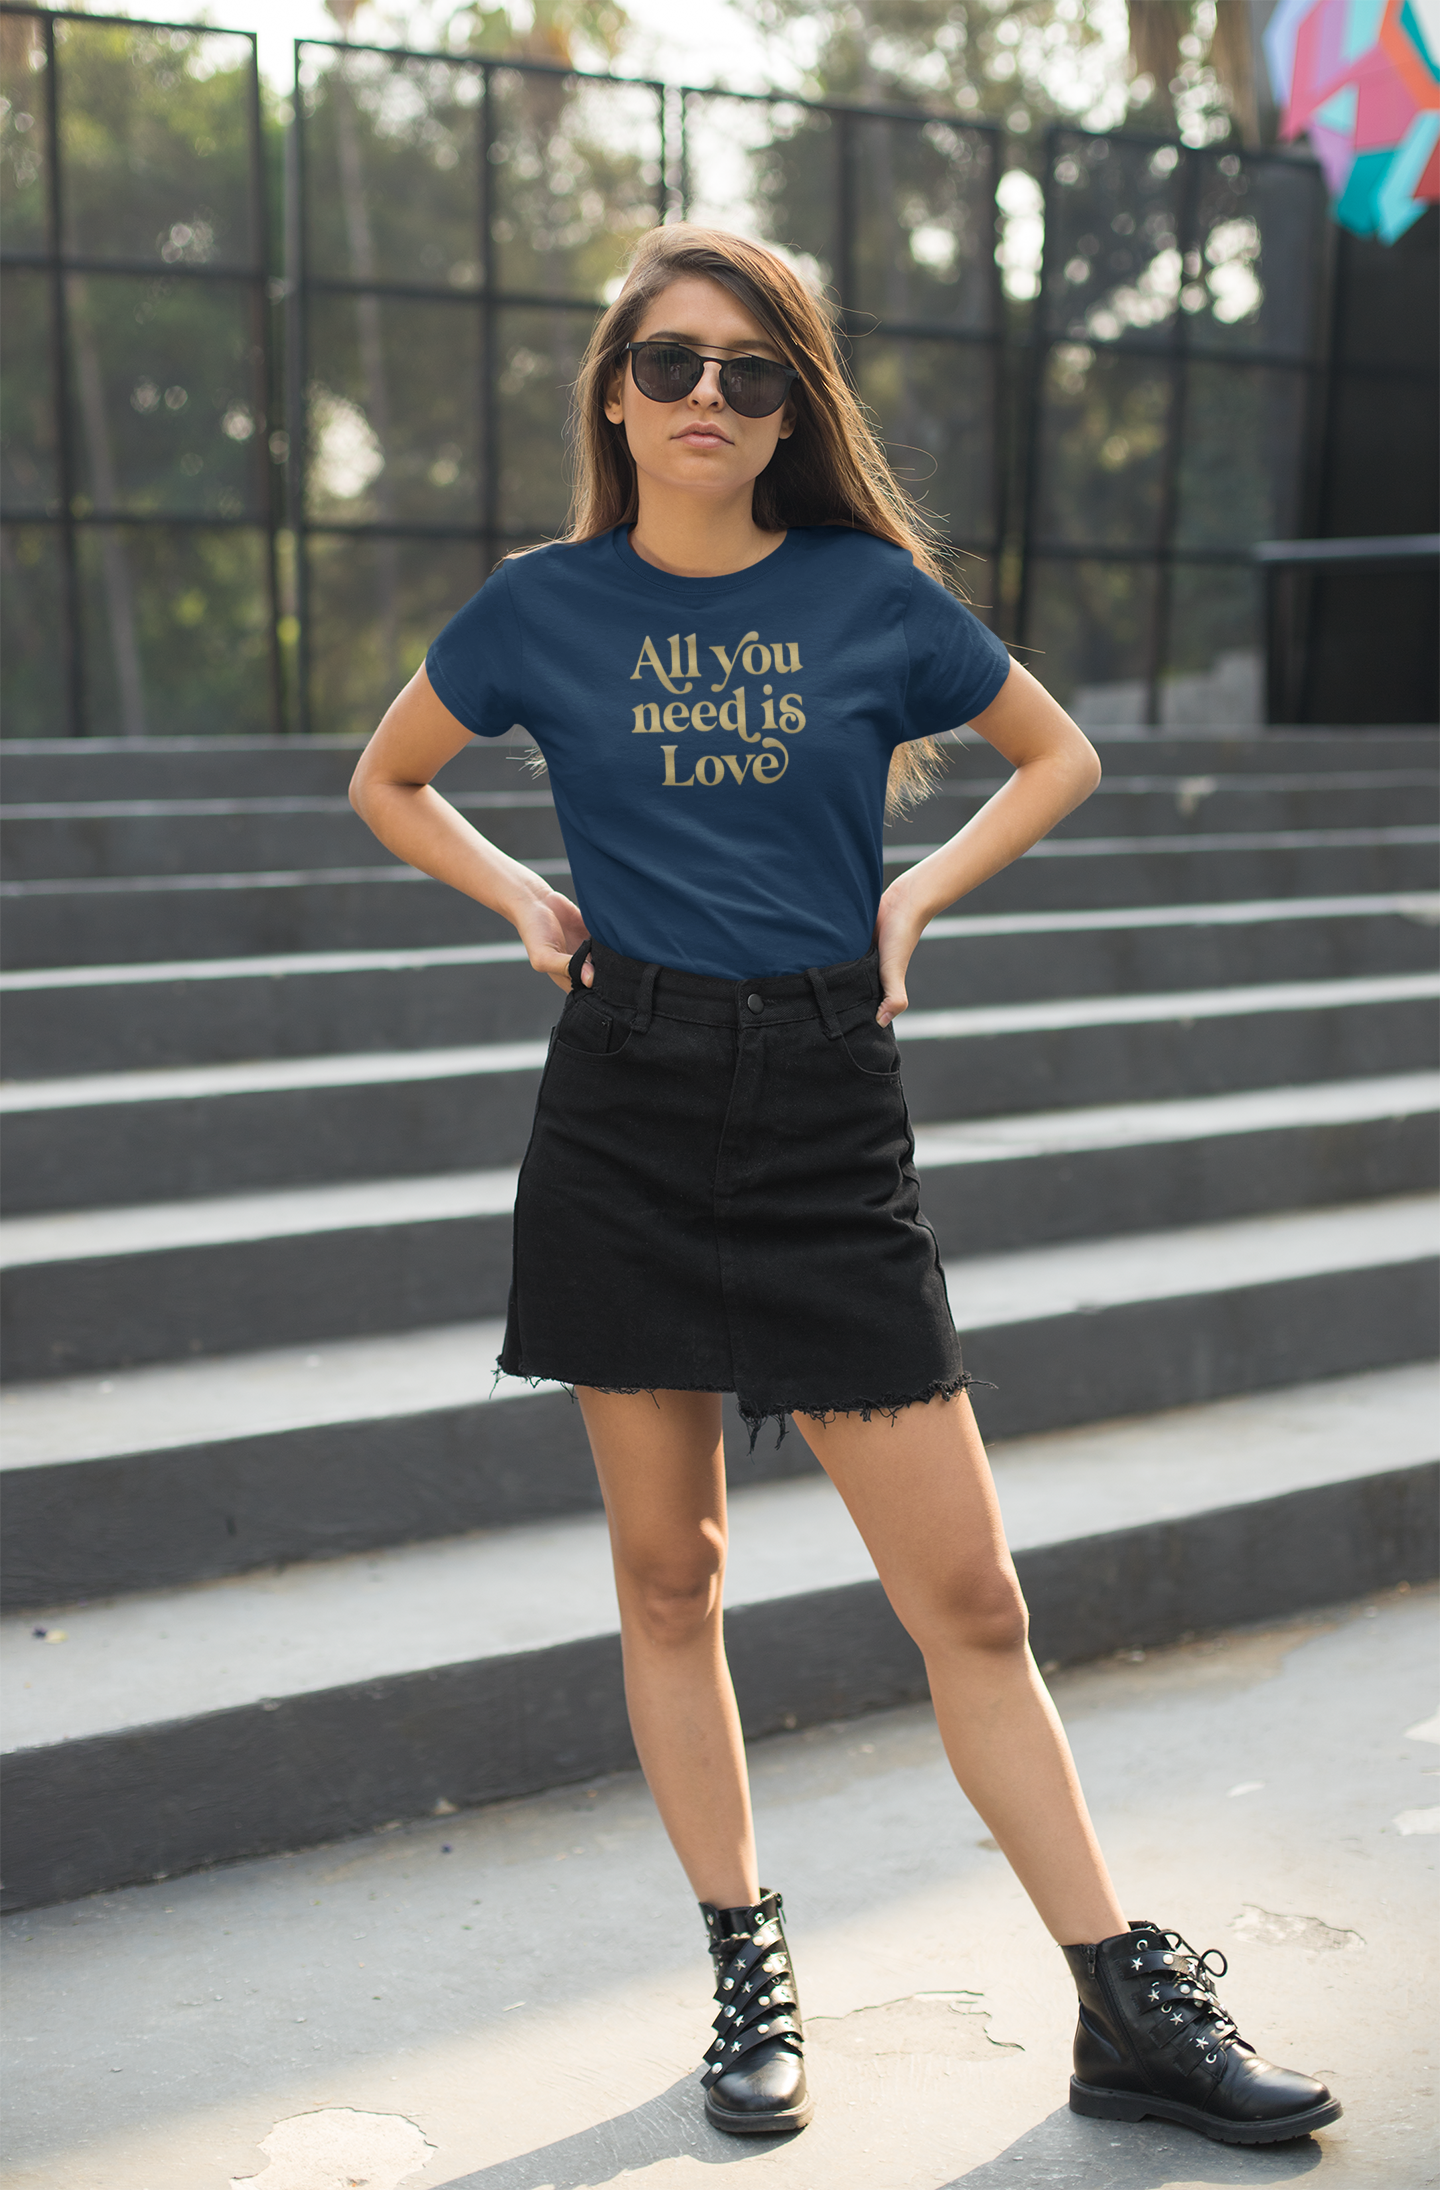 All you need is love - Womens T-Shirt